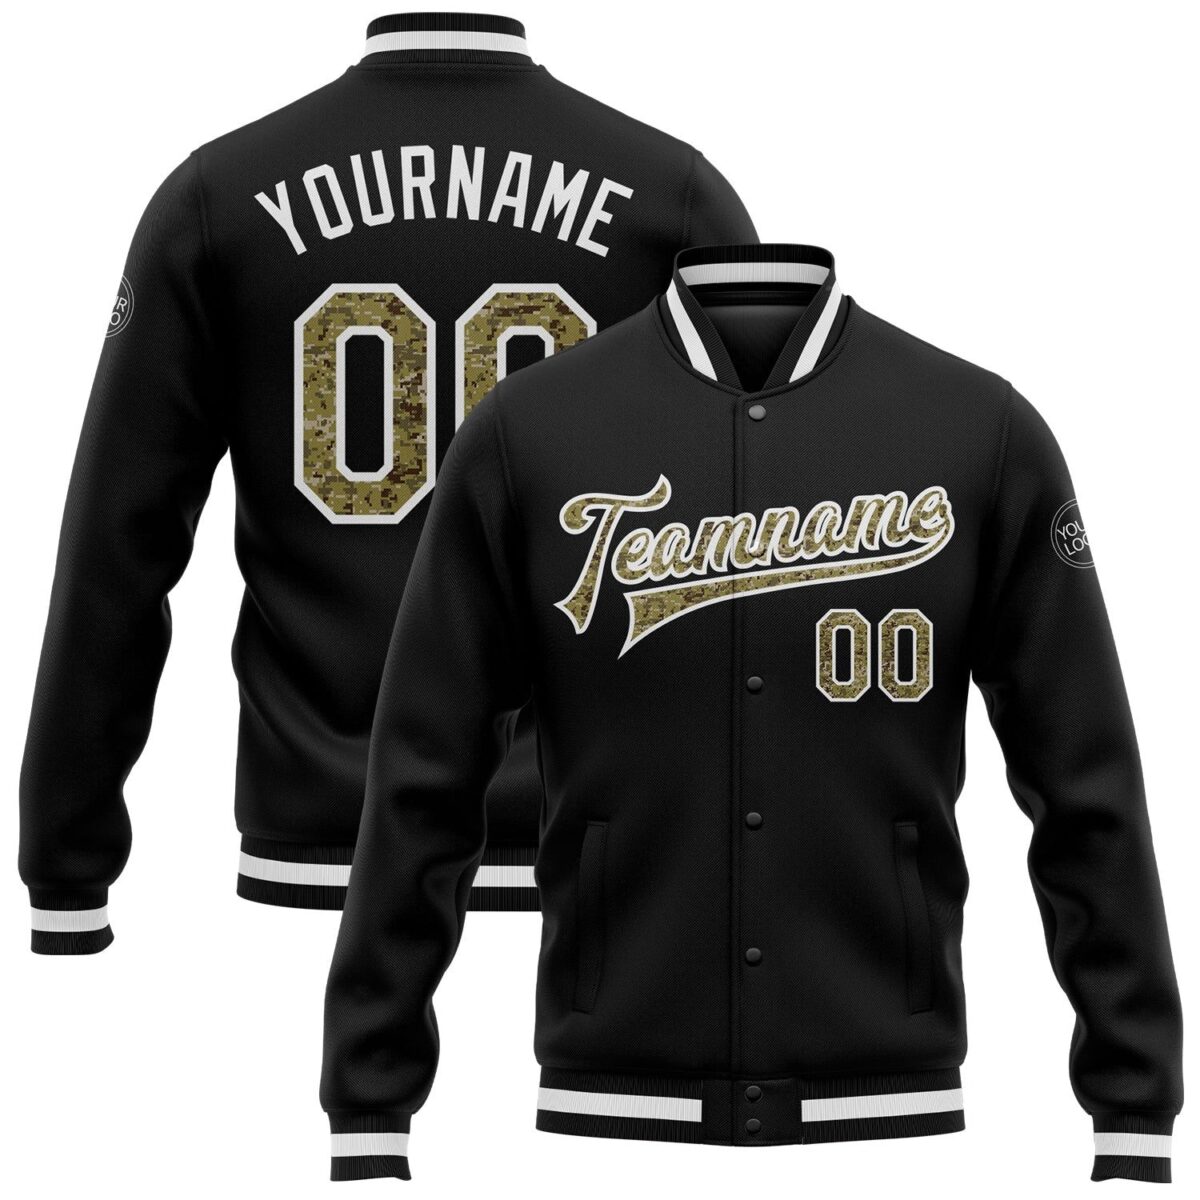 College Team Jacket with Back & White 1